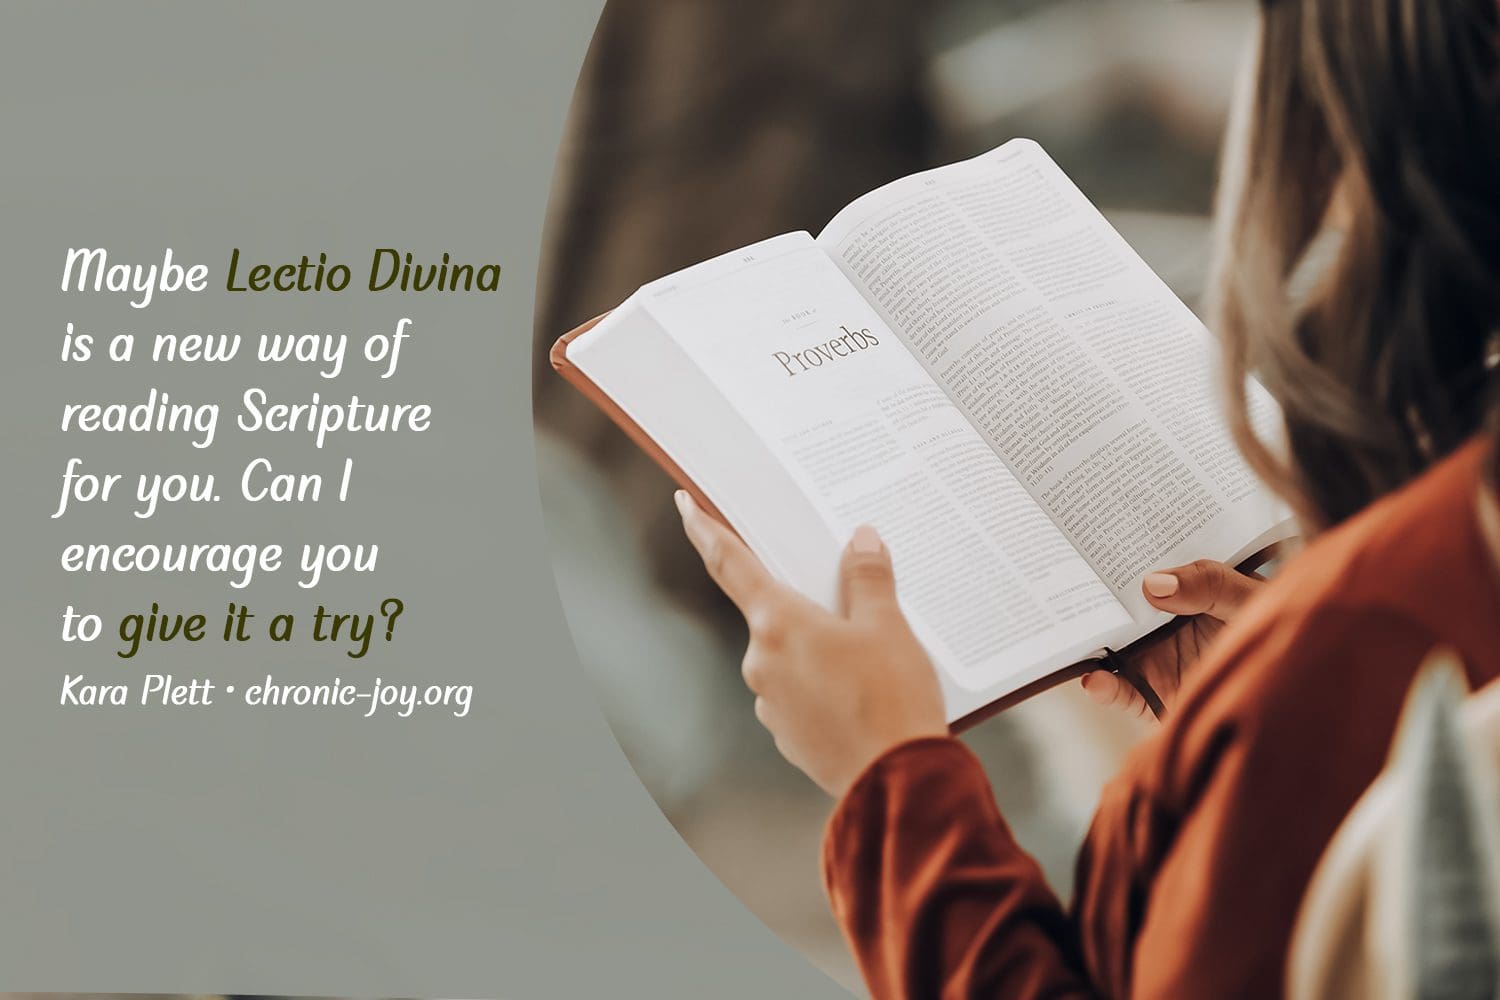 "Maybe Lectio Divina is a new way of reading Scripture for you. Can I encourage you to give it a try?" Kara Plett